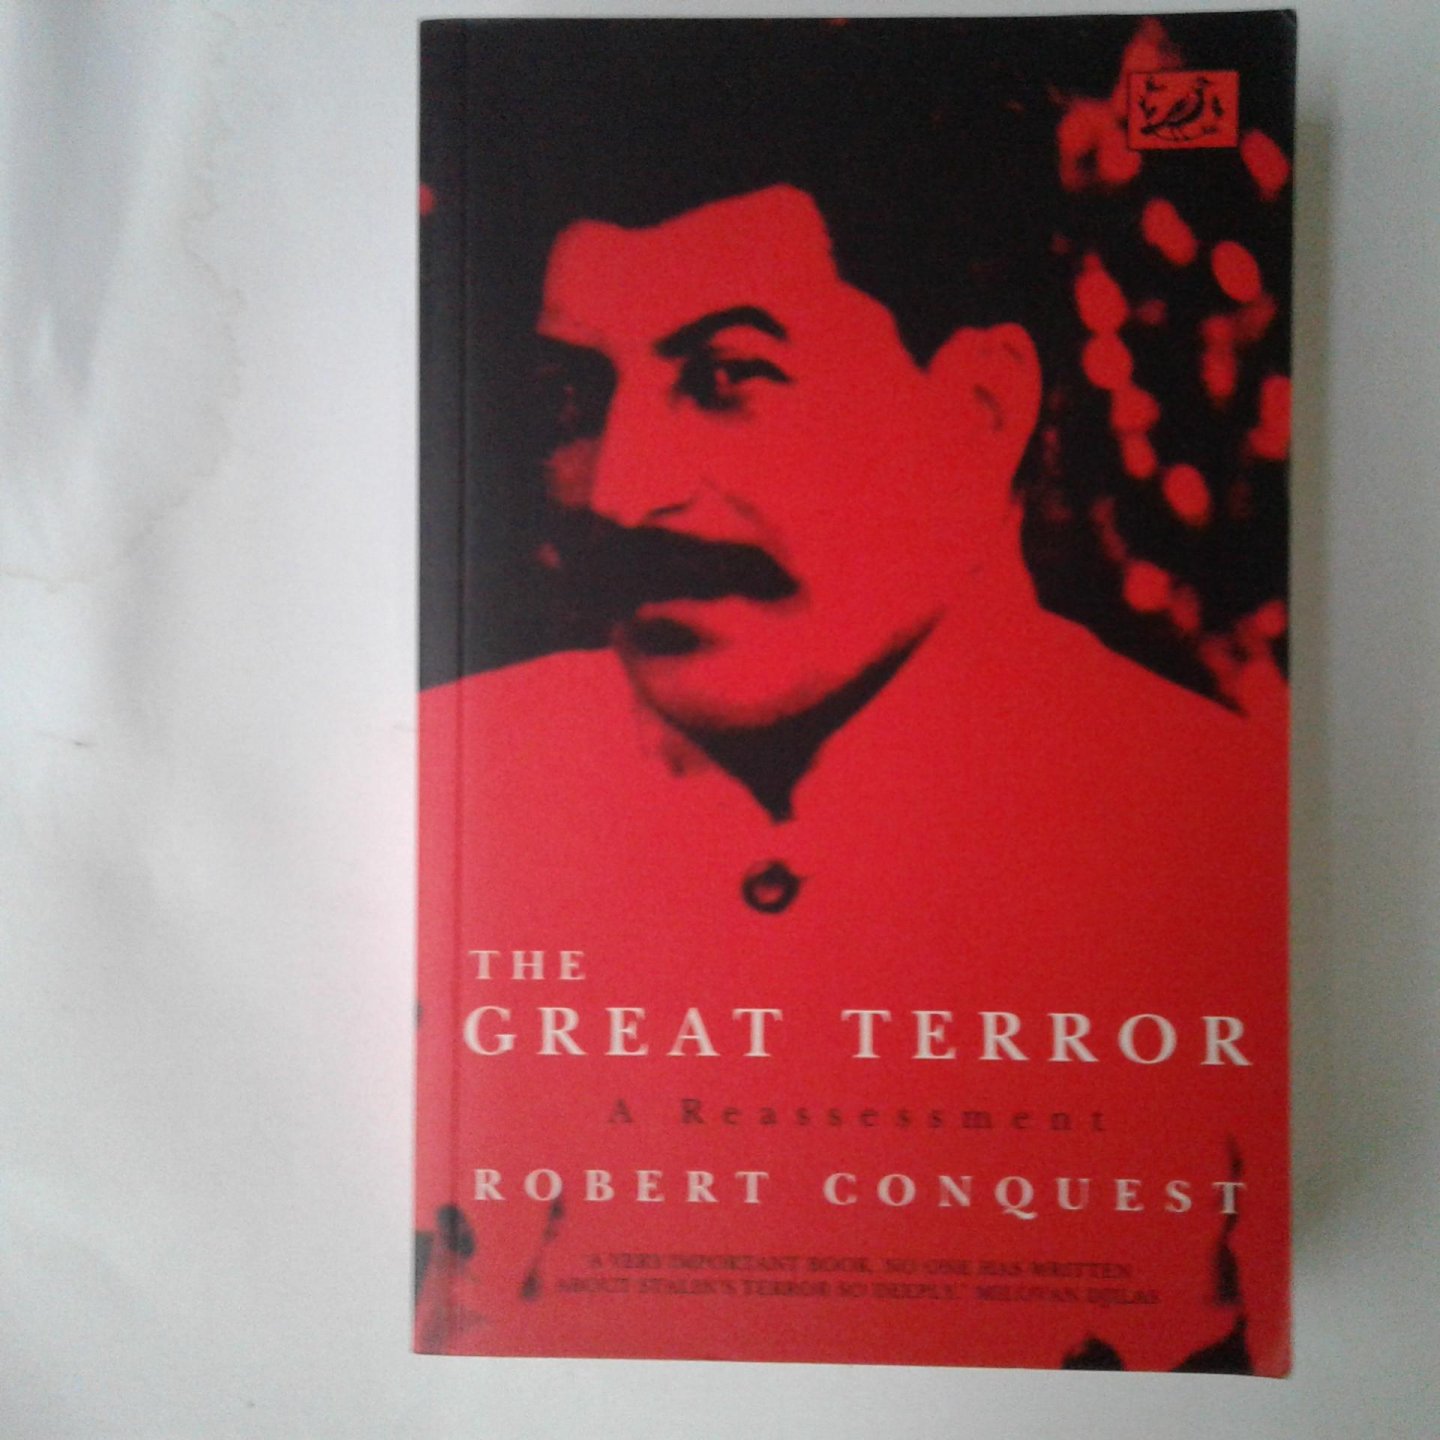 Conquest, Robert - The Great Terror ;  A Reassessment